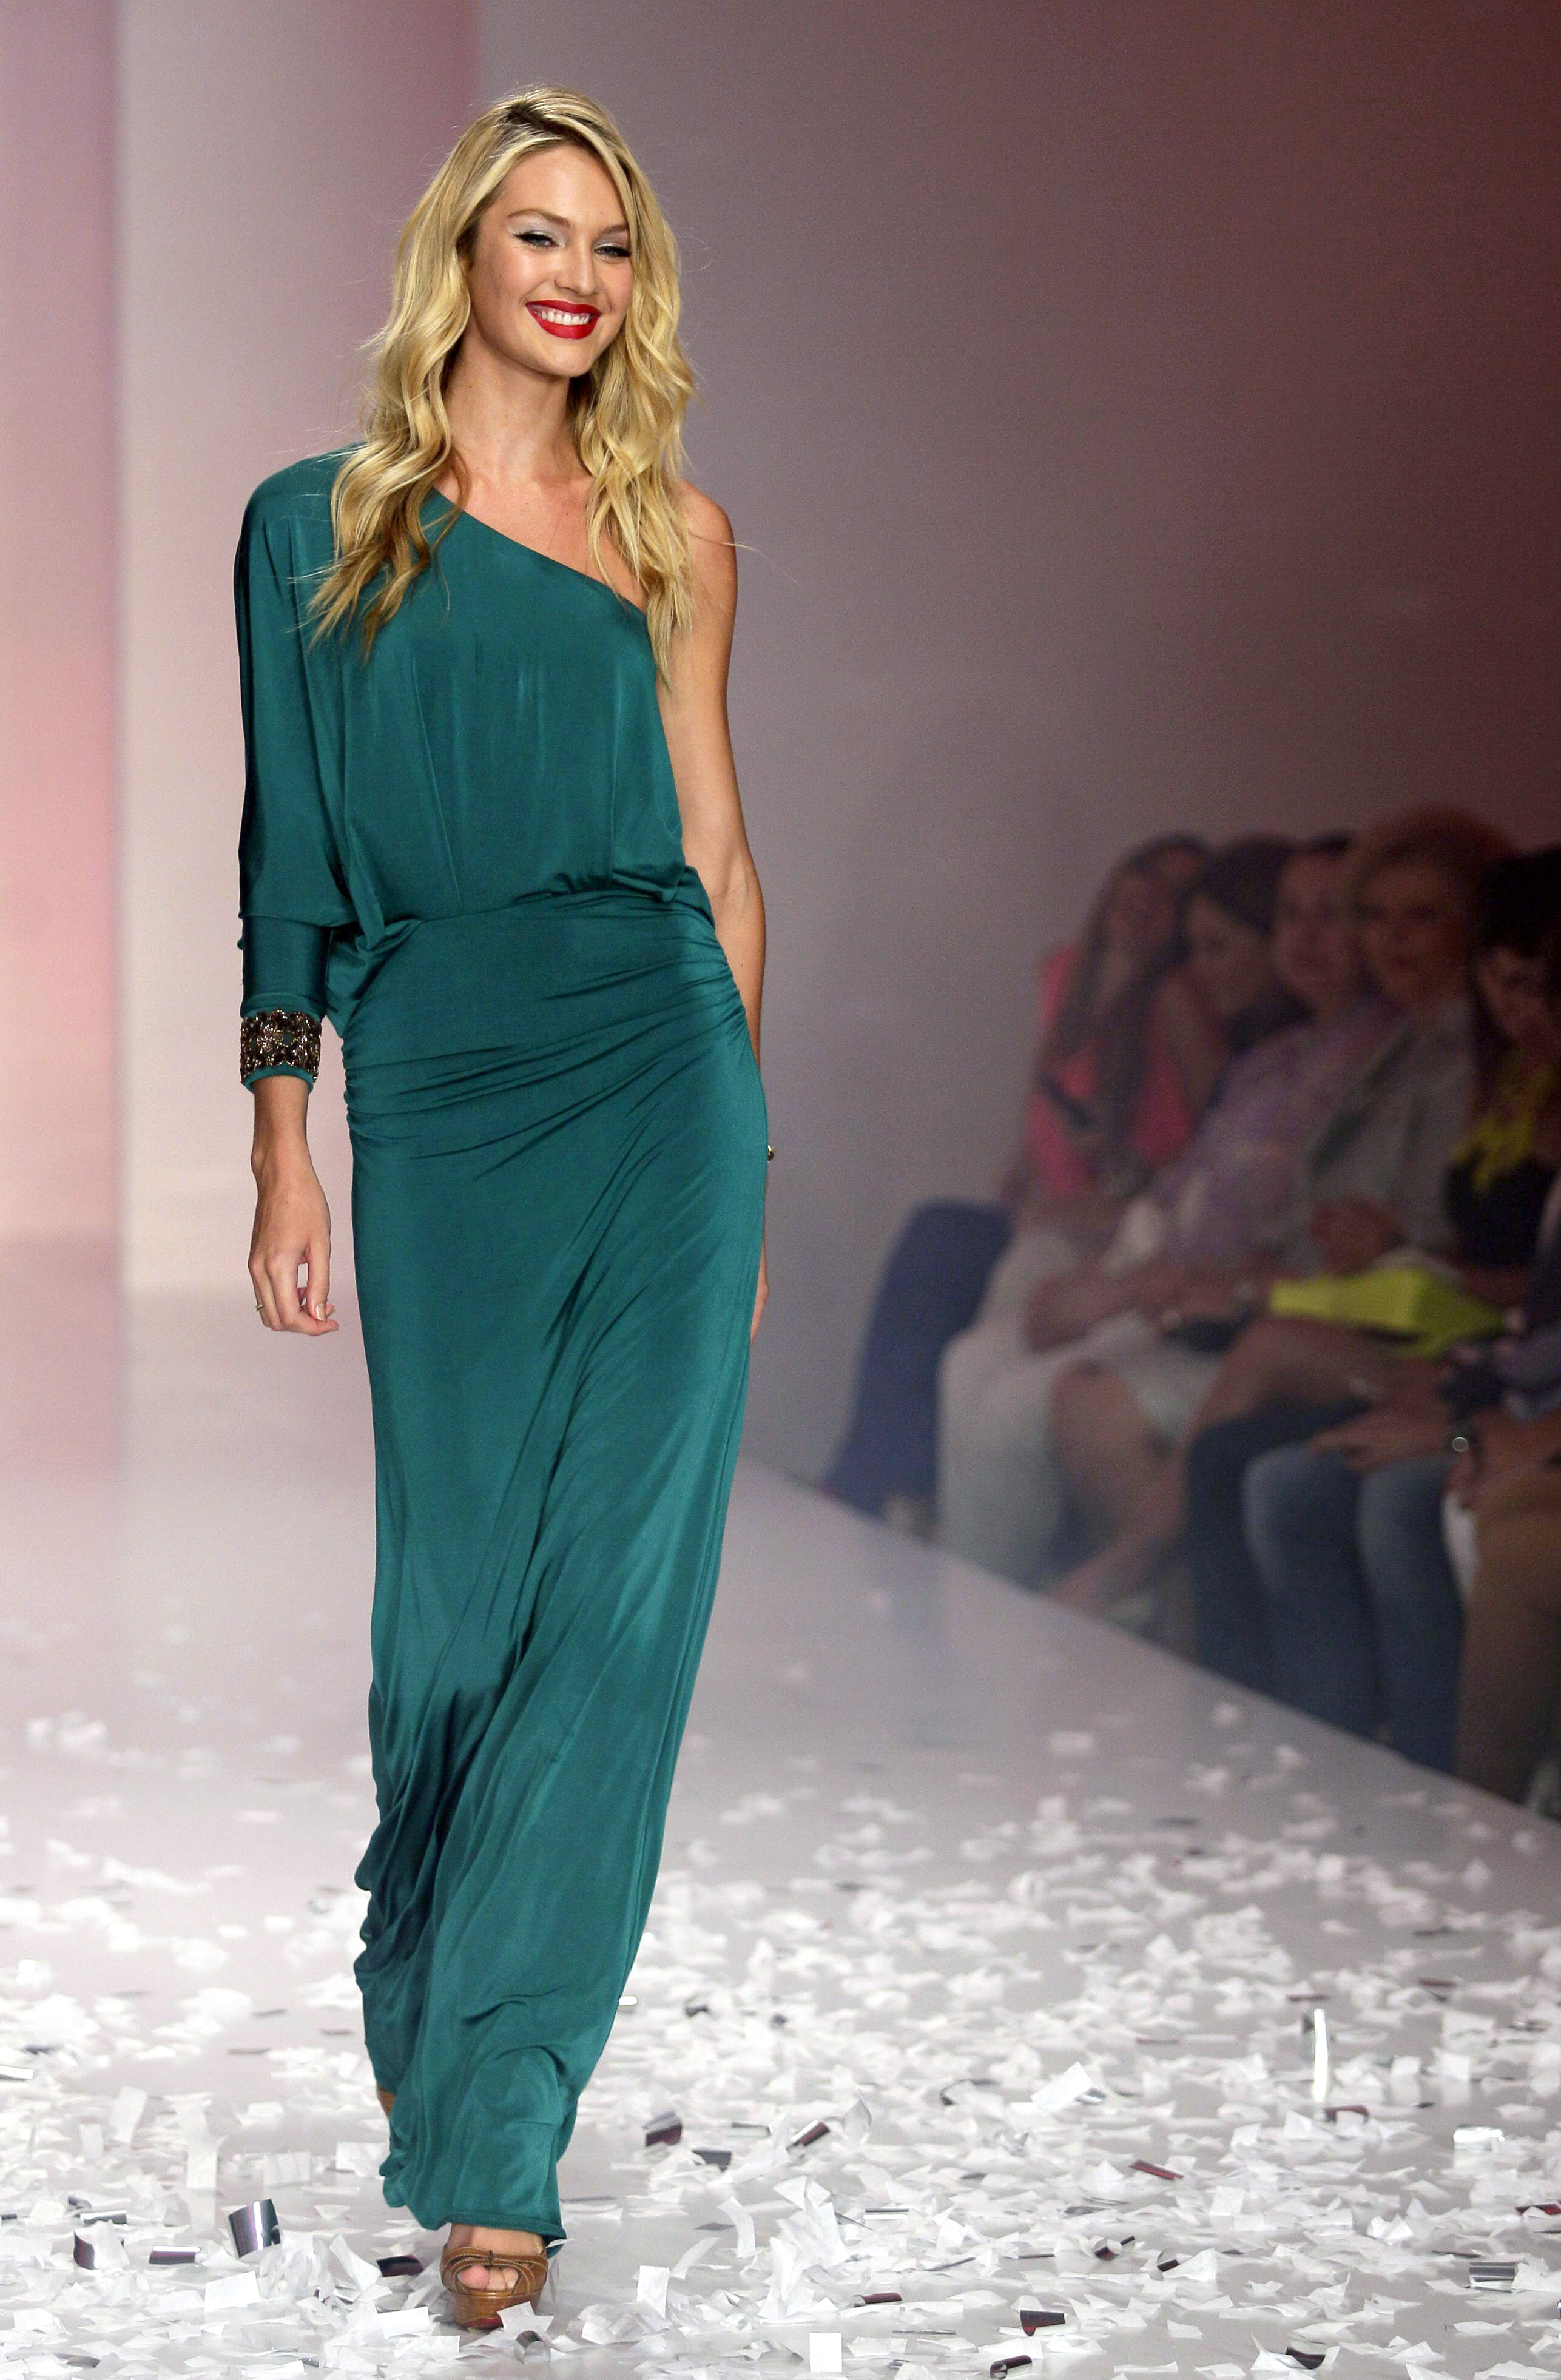 08 Candice Swanepoel - Liverpool AW runway fashion fest in Mexico City - 29082012.jpg